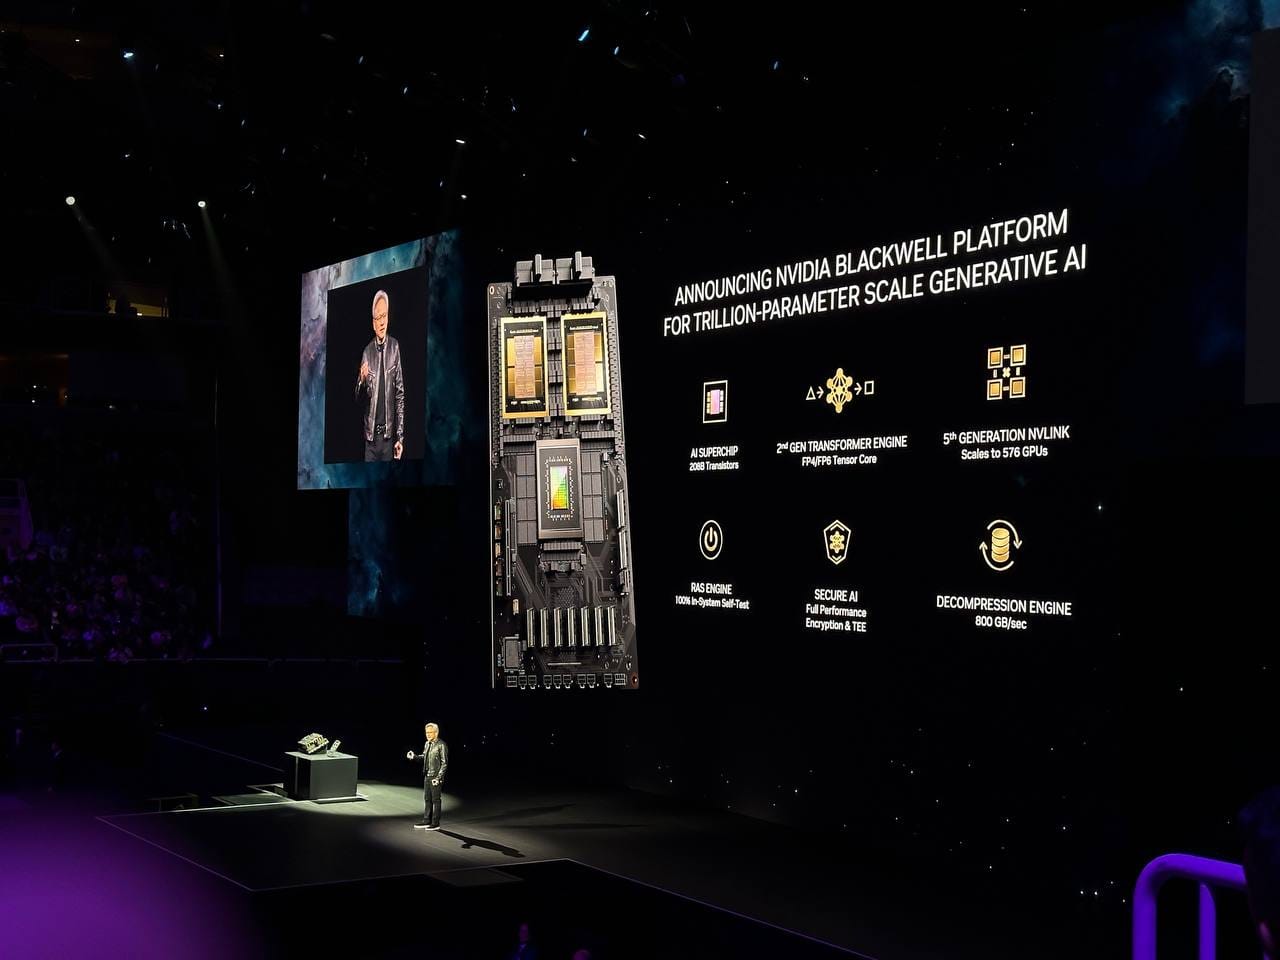 NVIDIA introduces the Blackwell architecture, a technology that will power "the new industrial revolution"